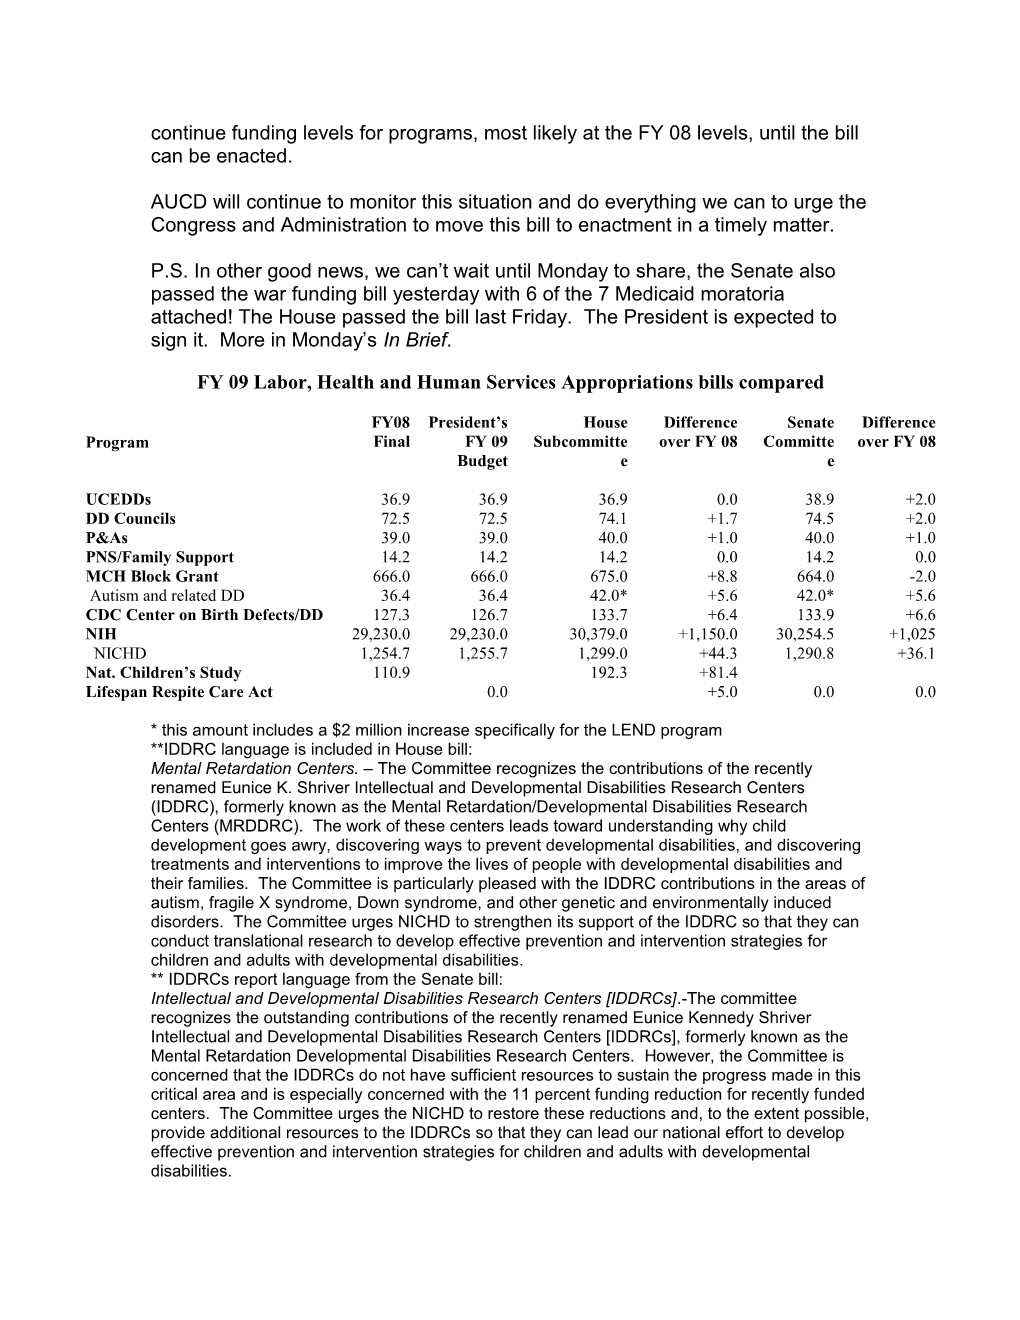 FY 09 Labor, Health and Human Services Appropriations Bills Compared